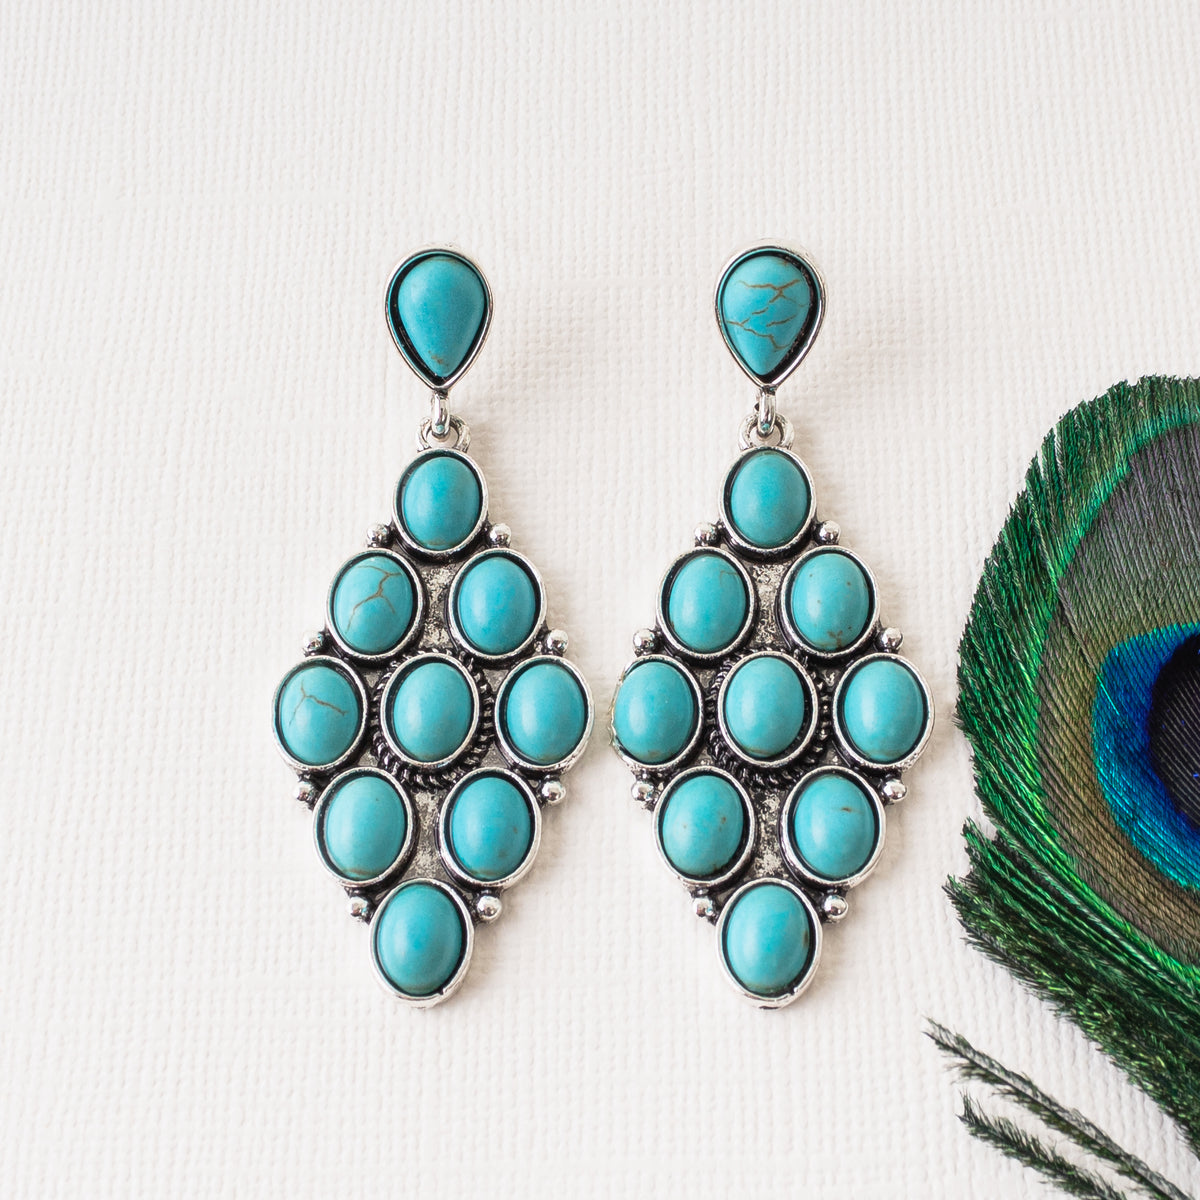 93081 - Squash Blossom Earrings - Turquoise & Silver